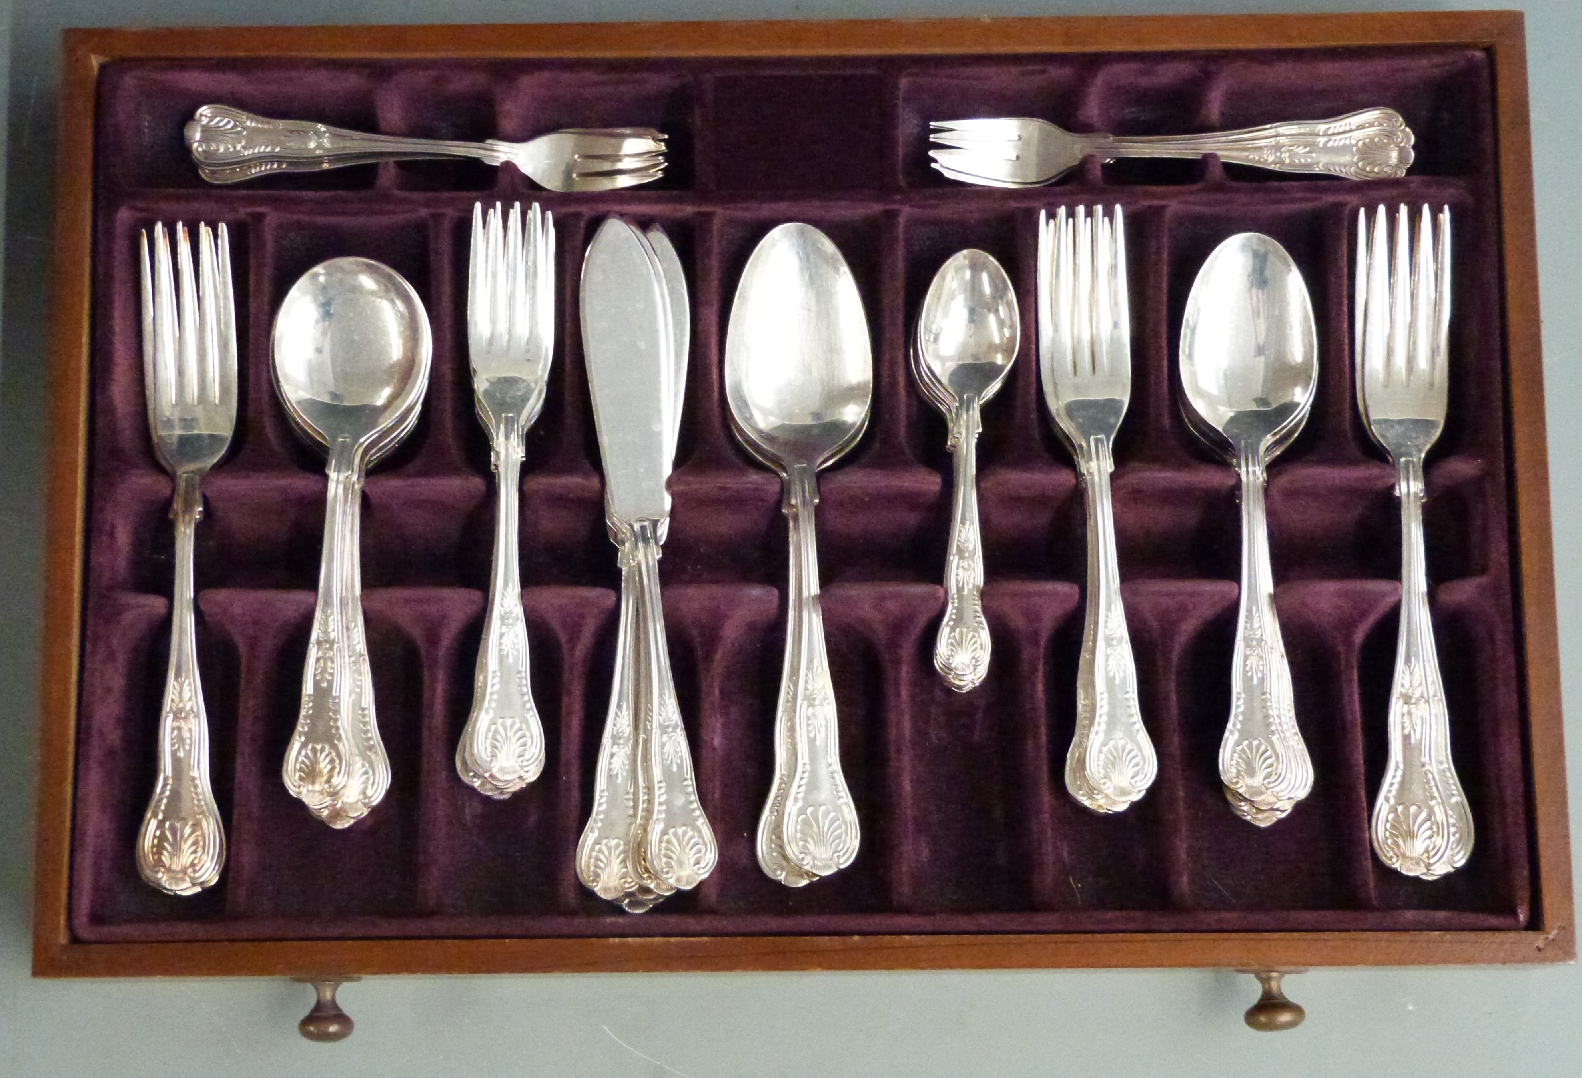 Viners twelve place setting silver plated canteen of Kings pattern cutlery - Image 2 of 4